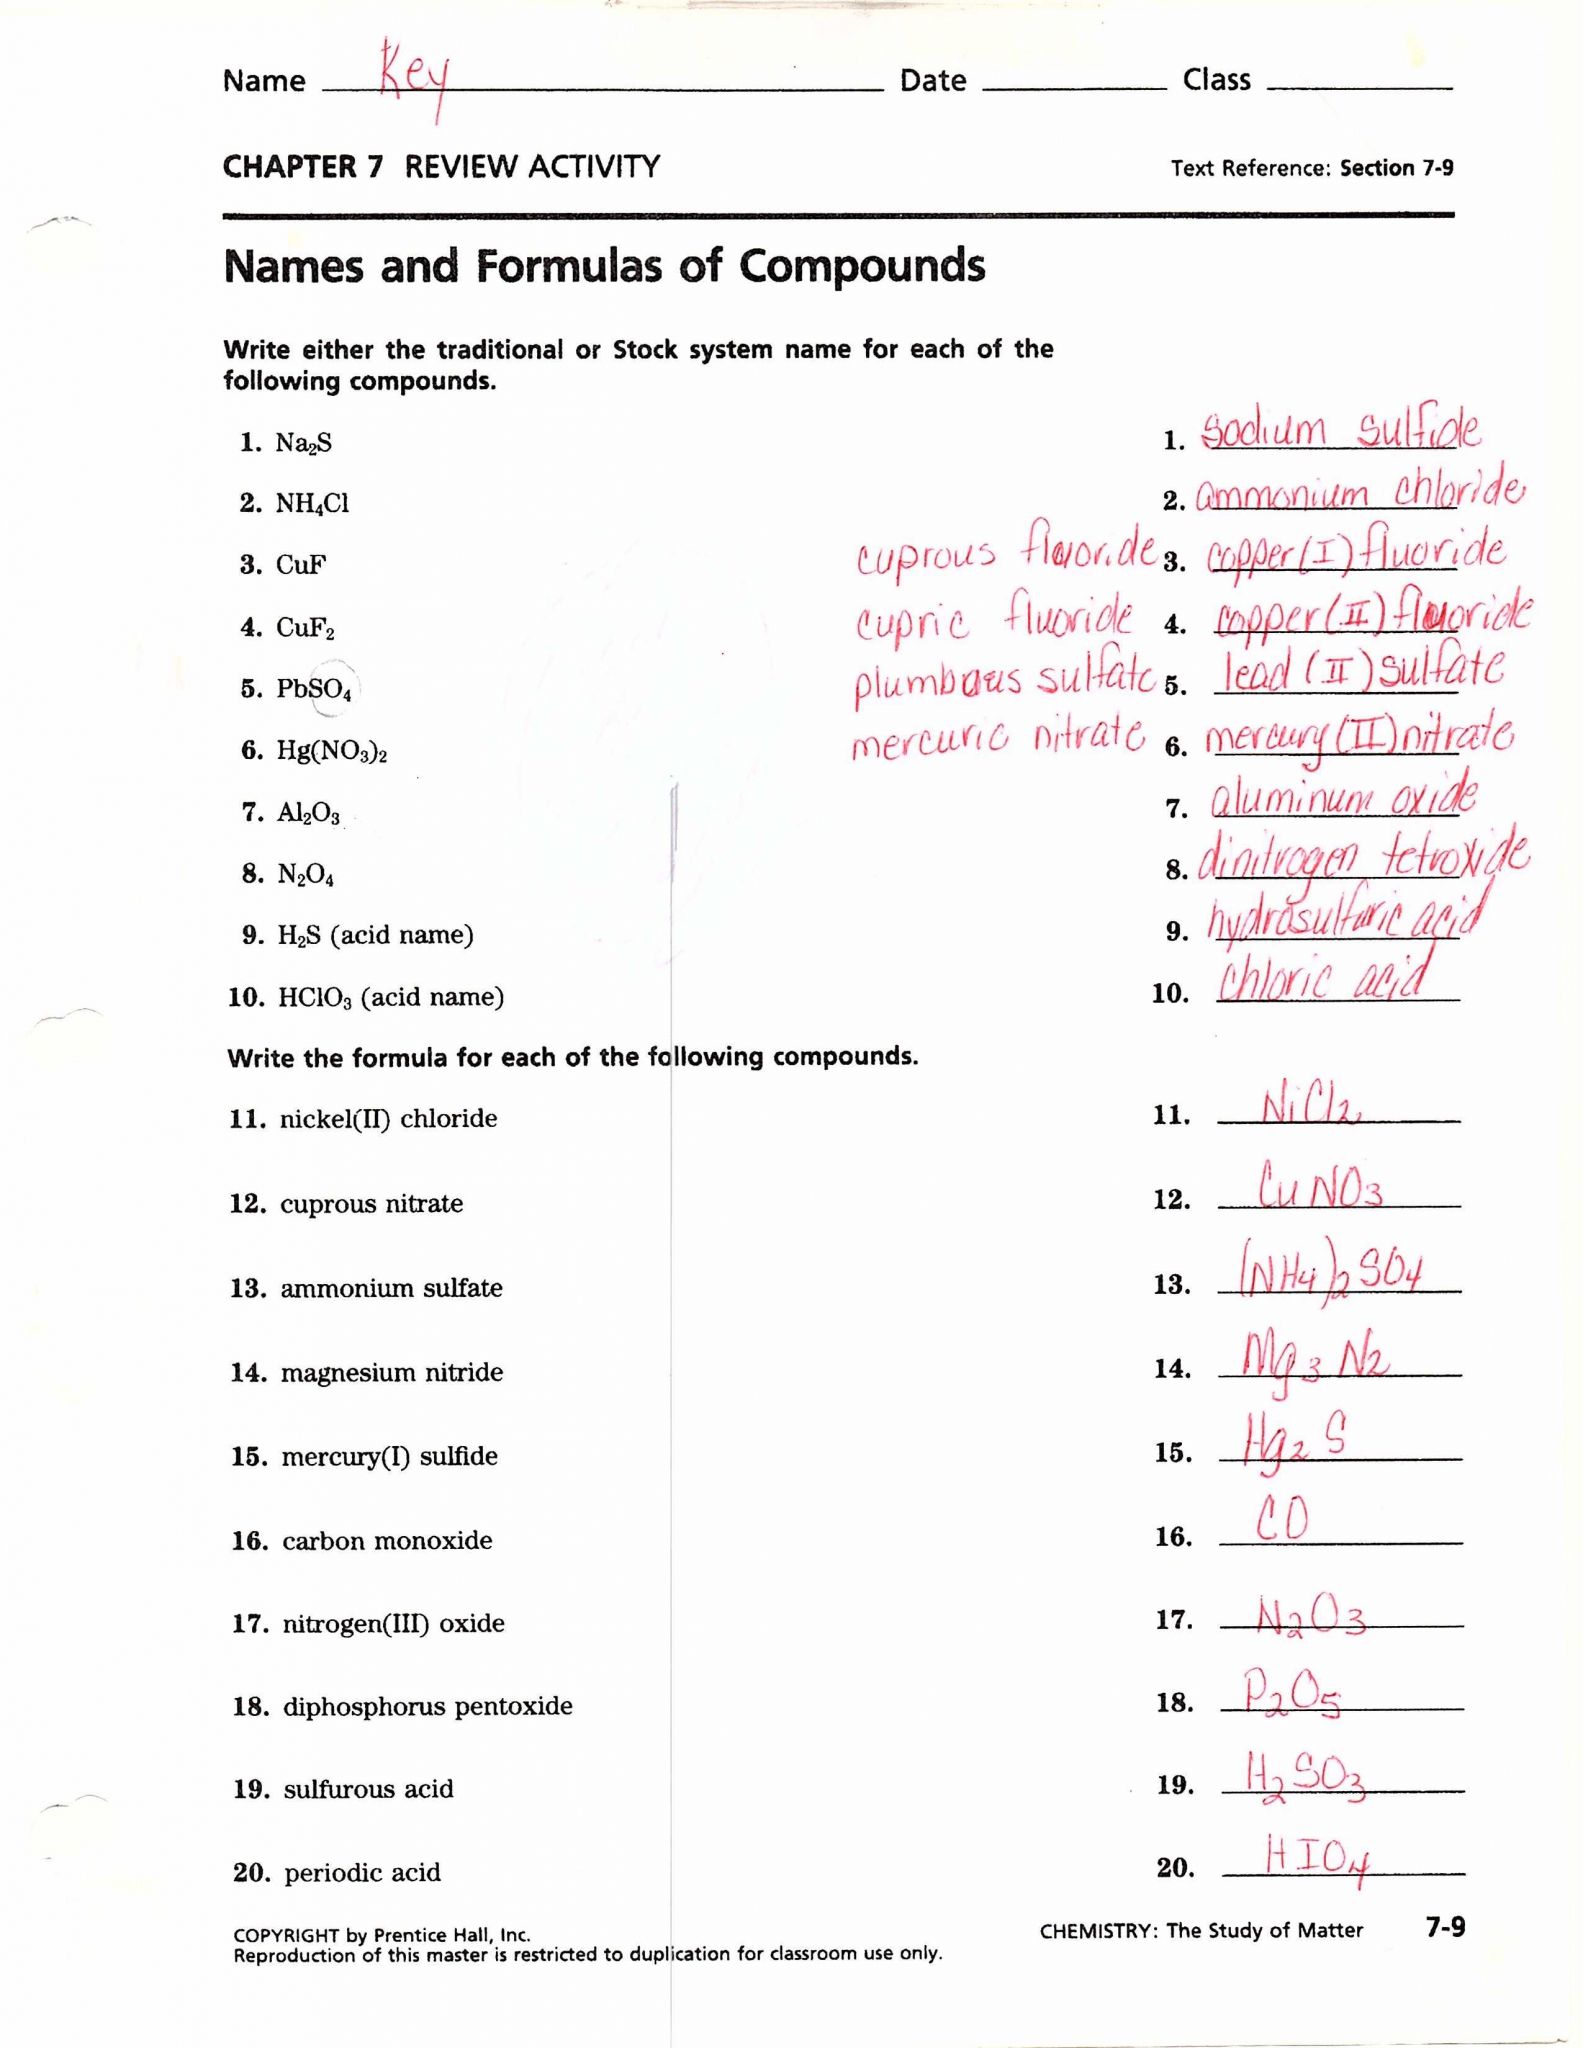 Naming Chemical Compounds Worksheet as Well as Chemical Names and formulas Worksheet Answers Choice Image